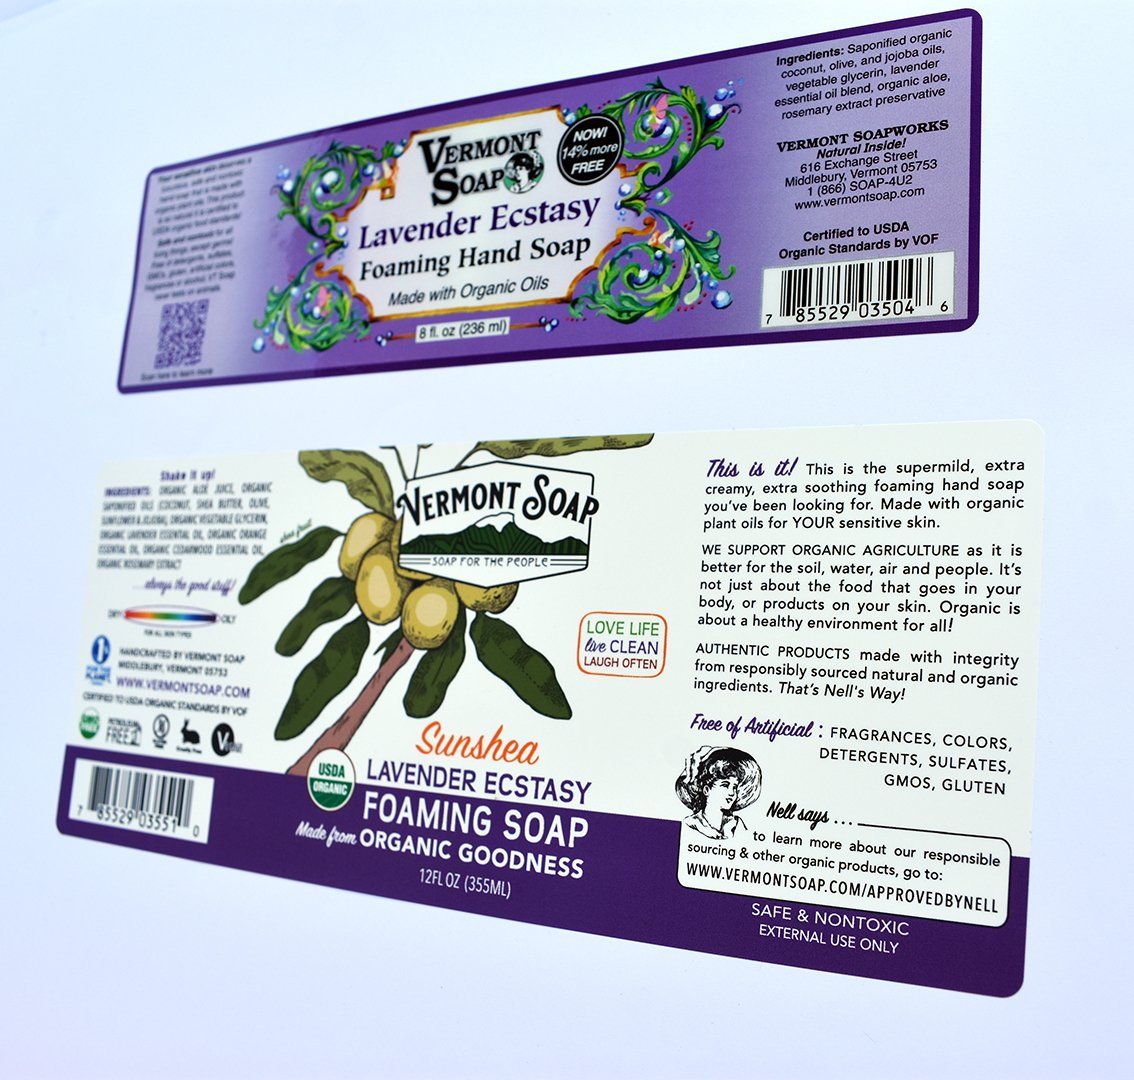 Lavender Ecstasy Foaming Soap labels before and after the rebrand